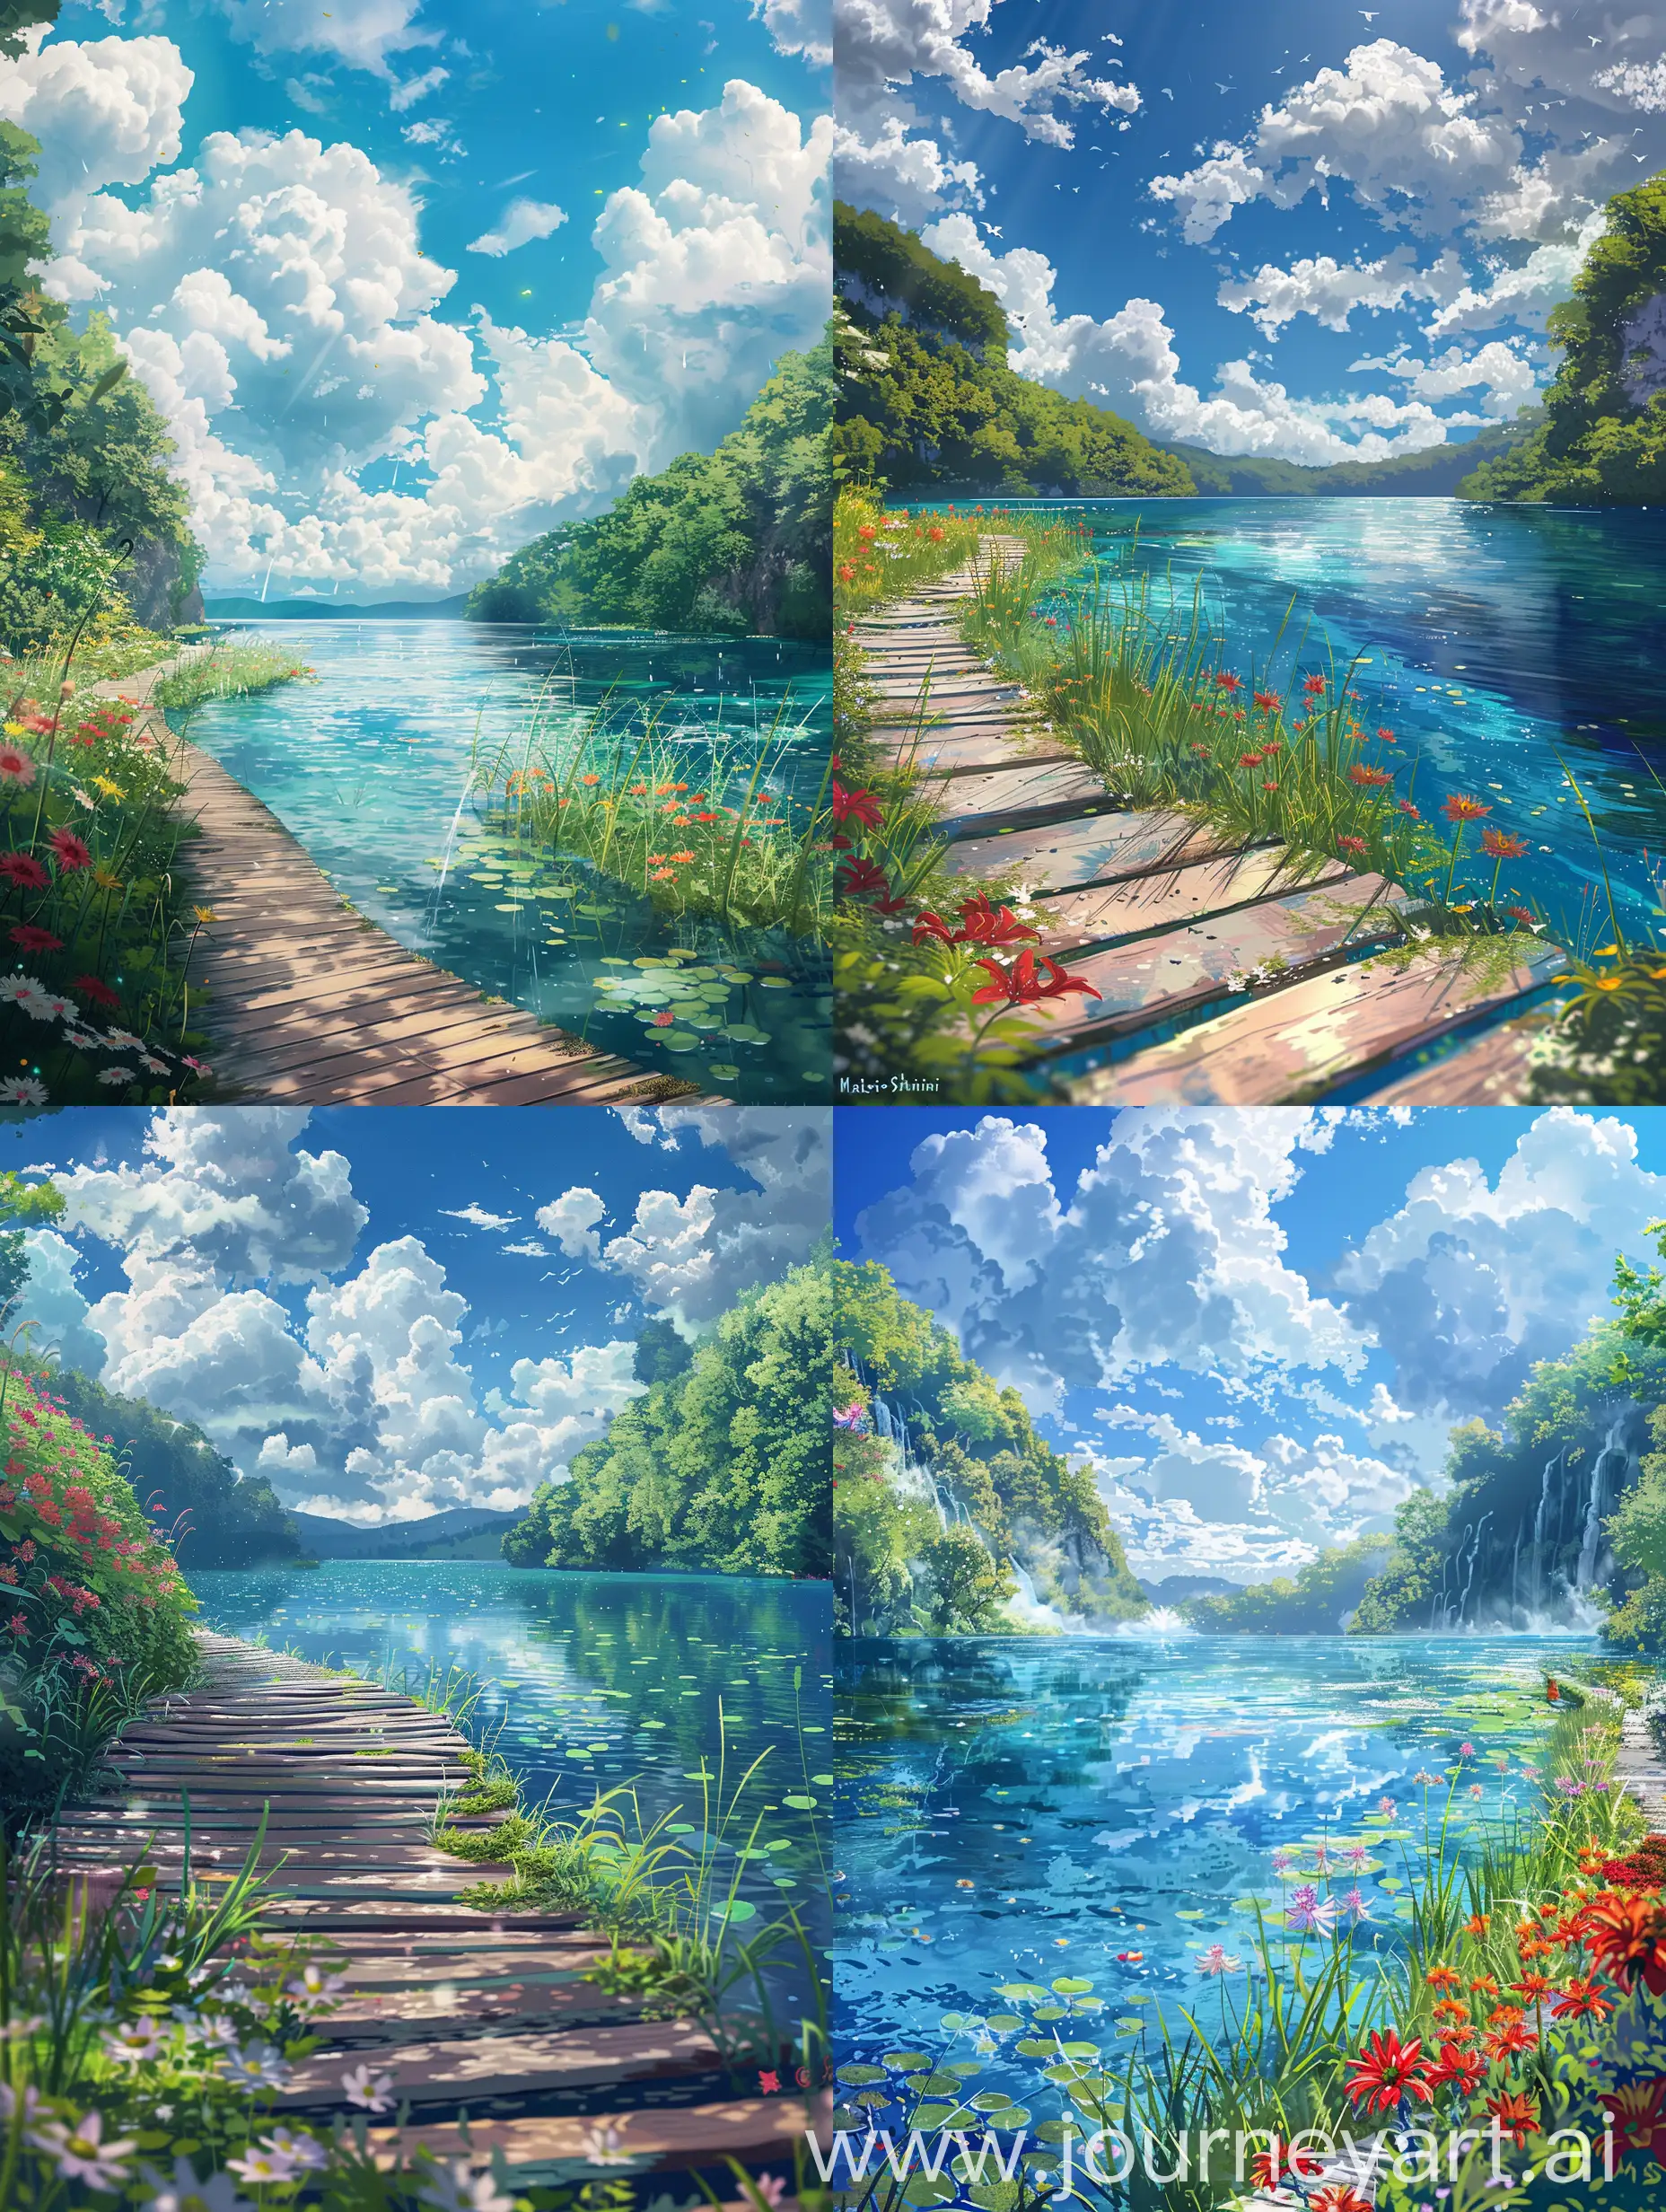 Beautiful anime style,makato shinkai tyle,lost in the wonders of nature,where air and water has a seemless flow,clouds are fluffy,sky is beautiful,vibrant flowers,a little bit of grass,inspired from One of the most beautiful walkways in the world. Plitvice Lakes National Park, Croatia,everything is highly detailed,water is beautiful,natures wonder.